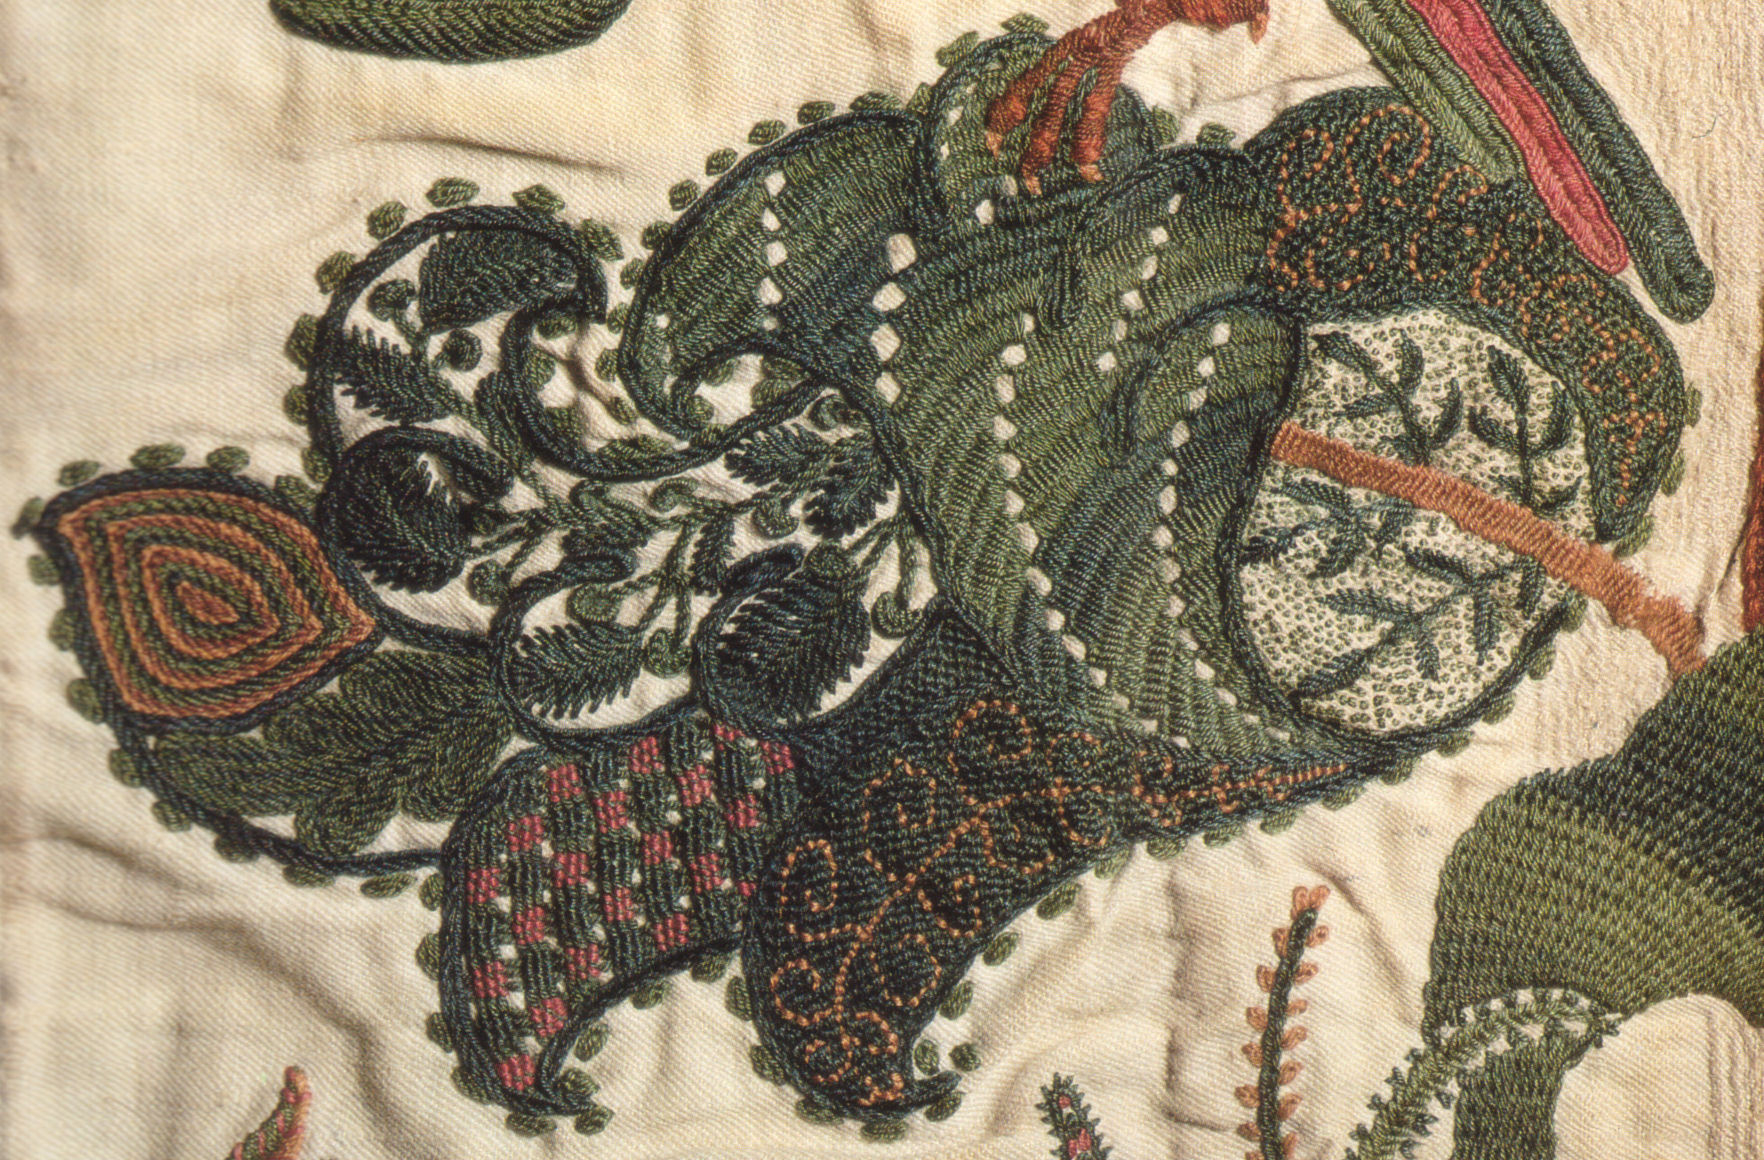 Wool Embroidery Patterns Crewel Embroidery Wikipedia